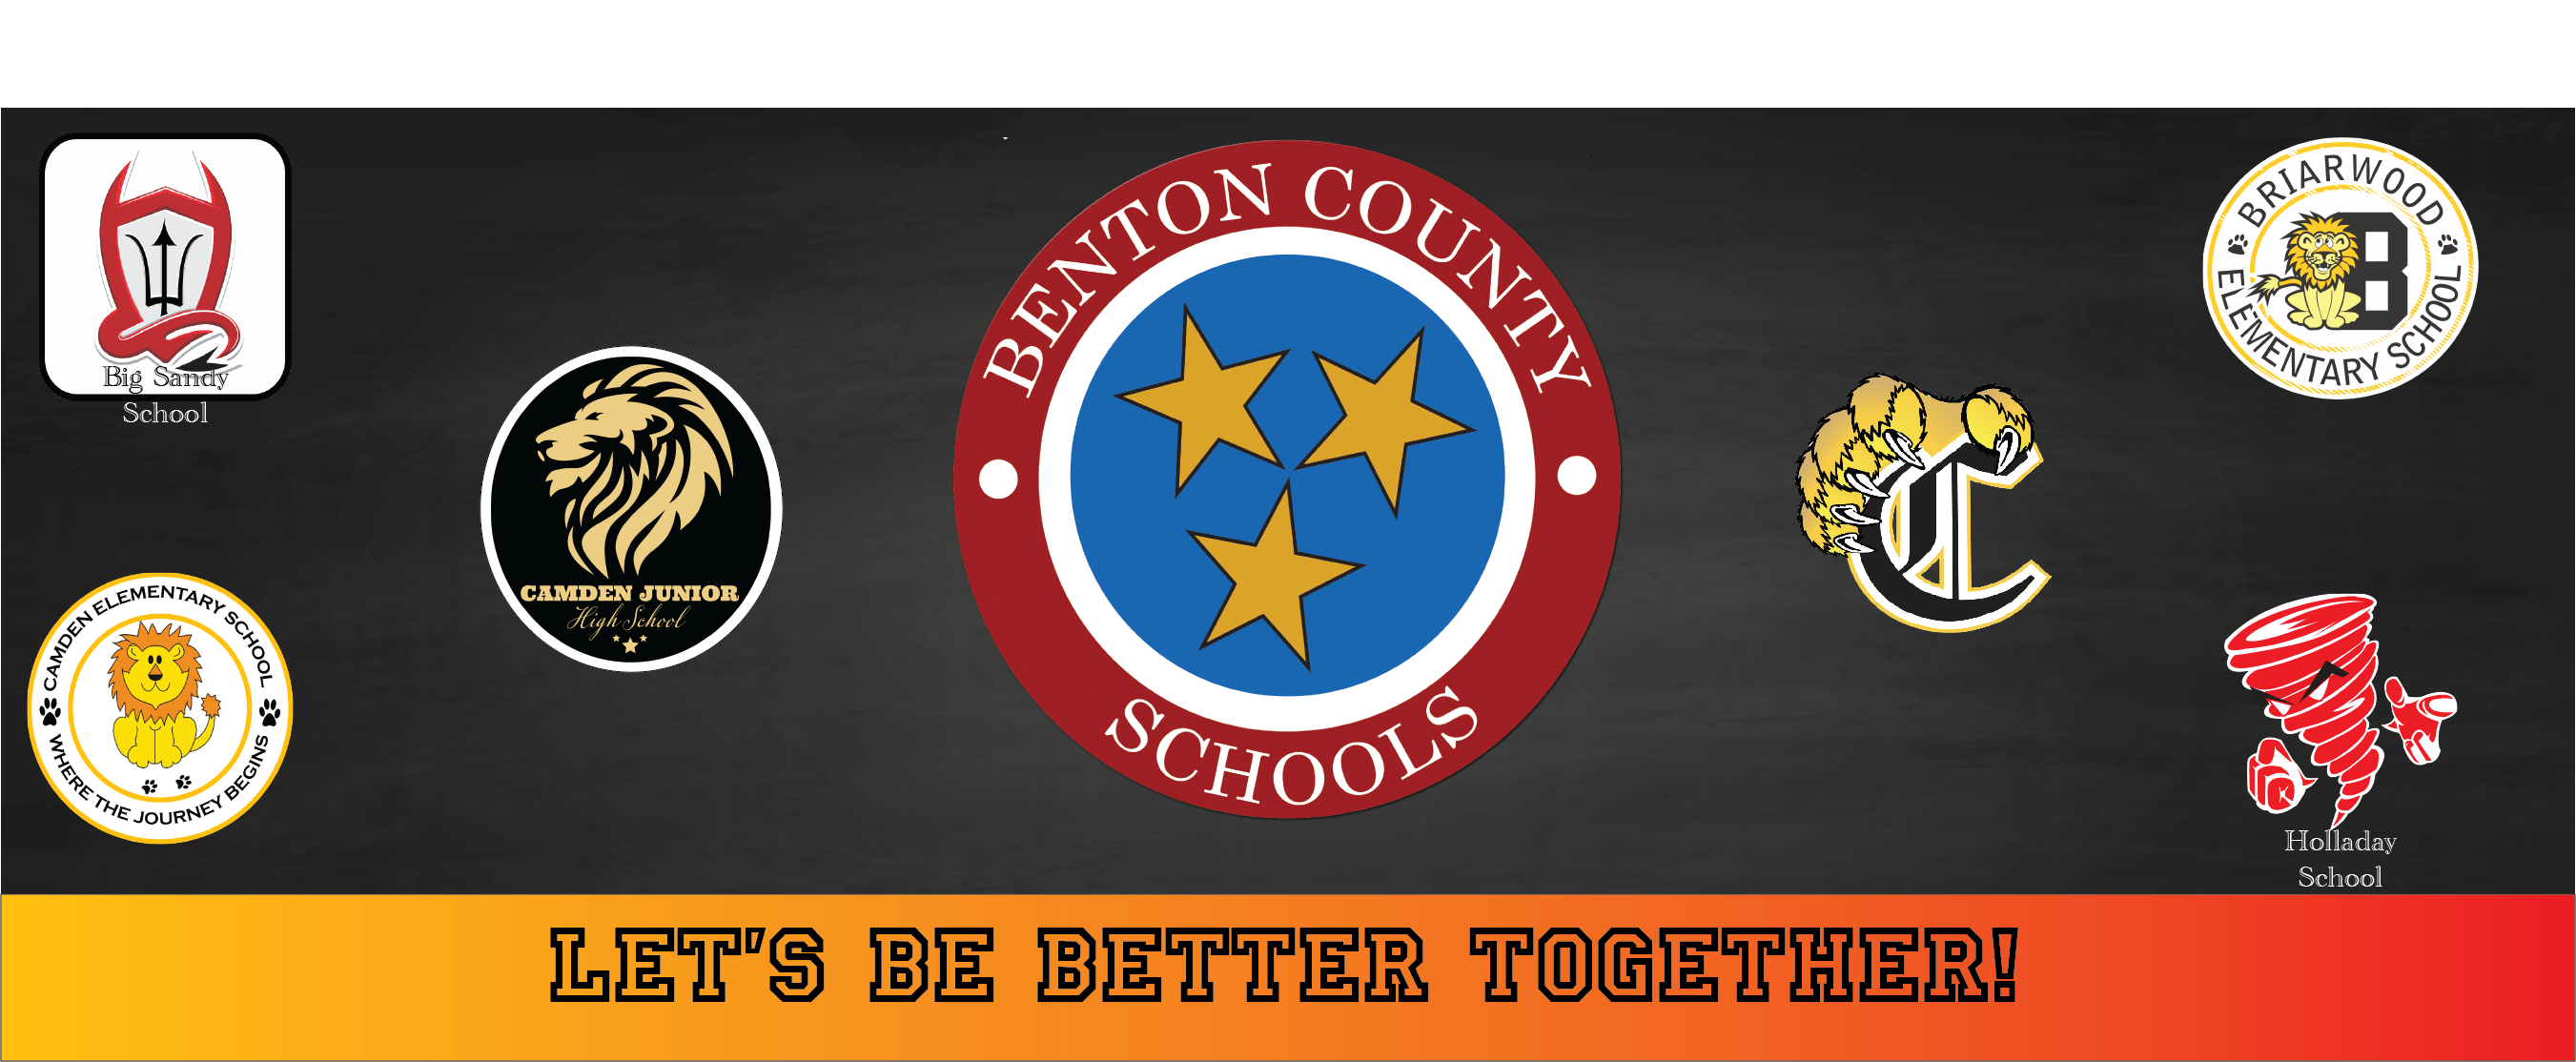 Benton County Schools - Let's Be Better Together!